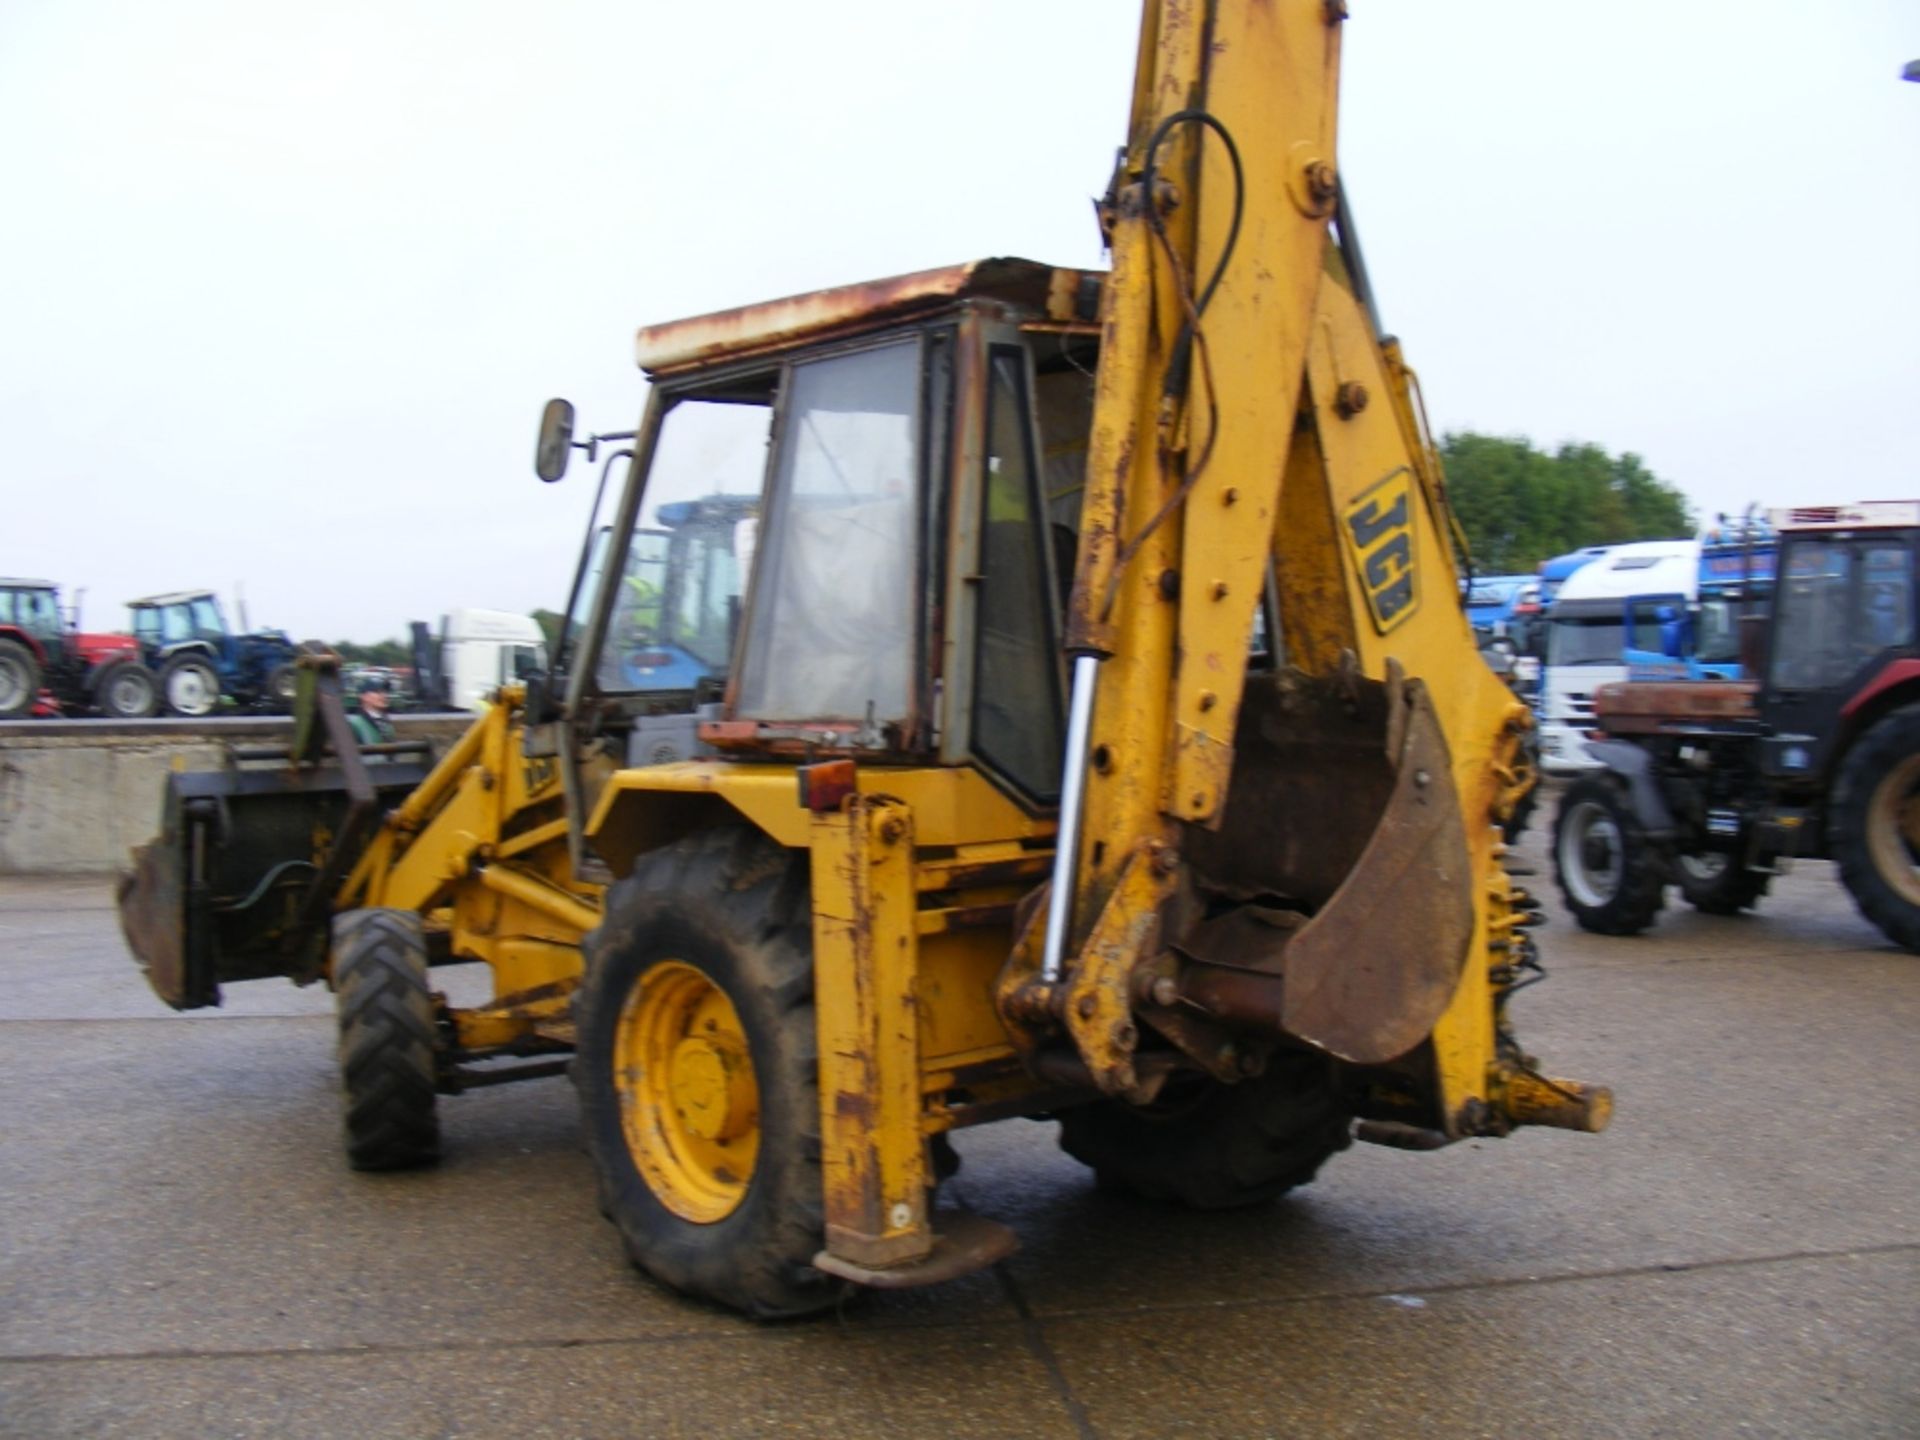 JCB 3CX Turbo Digger Loader with 5 Stud Rear Axle, 4 in 1 Extender, 3no. Buckets & Pallet Tines. - Image 7 of 7